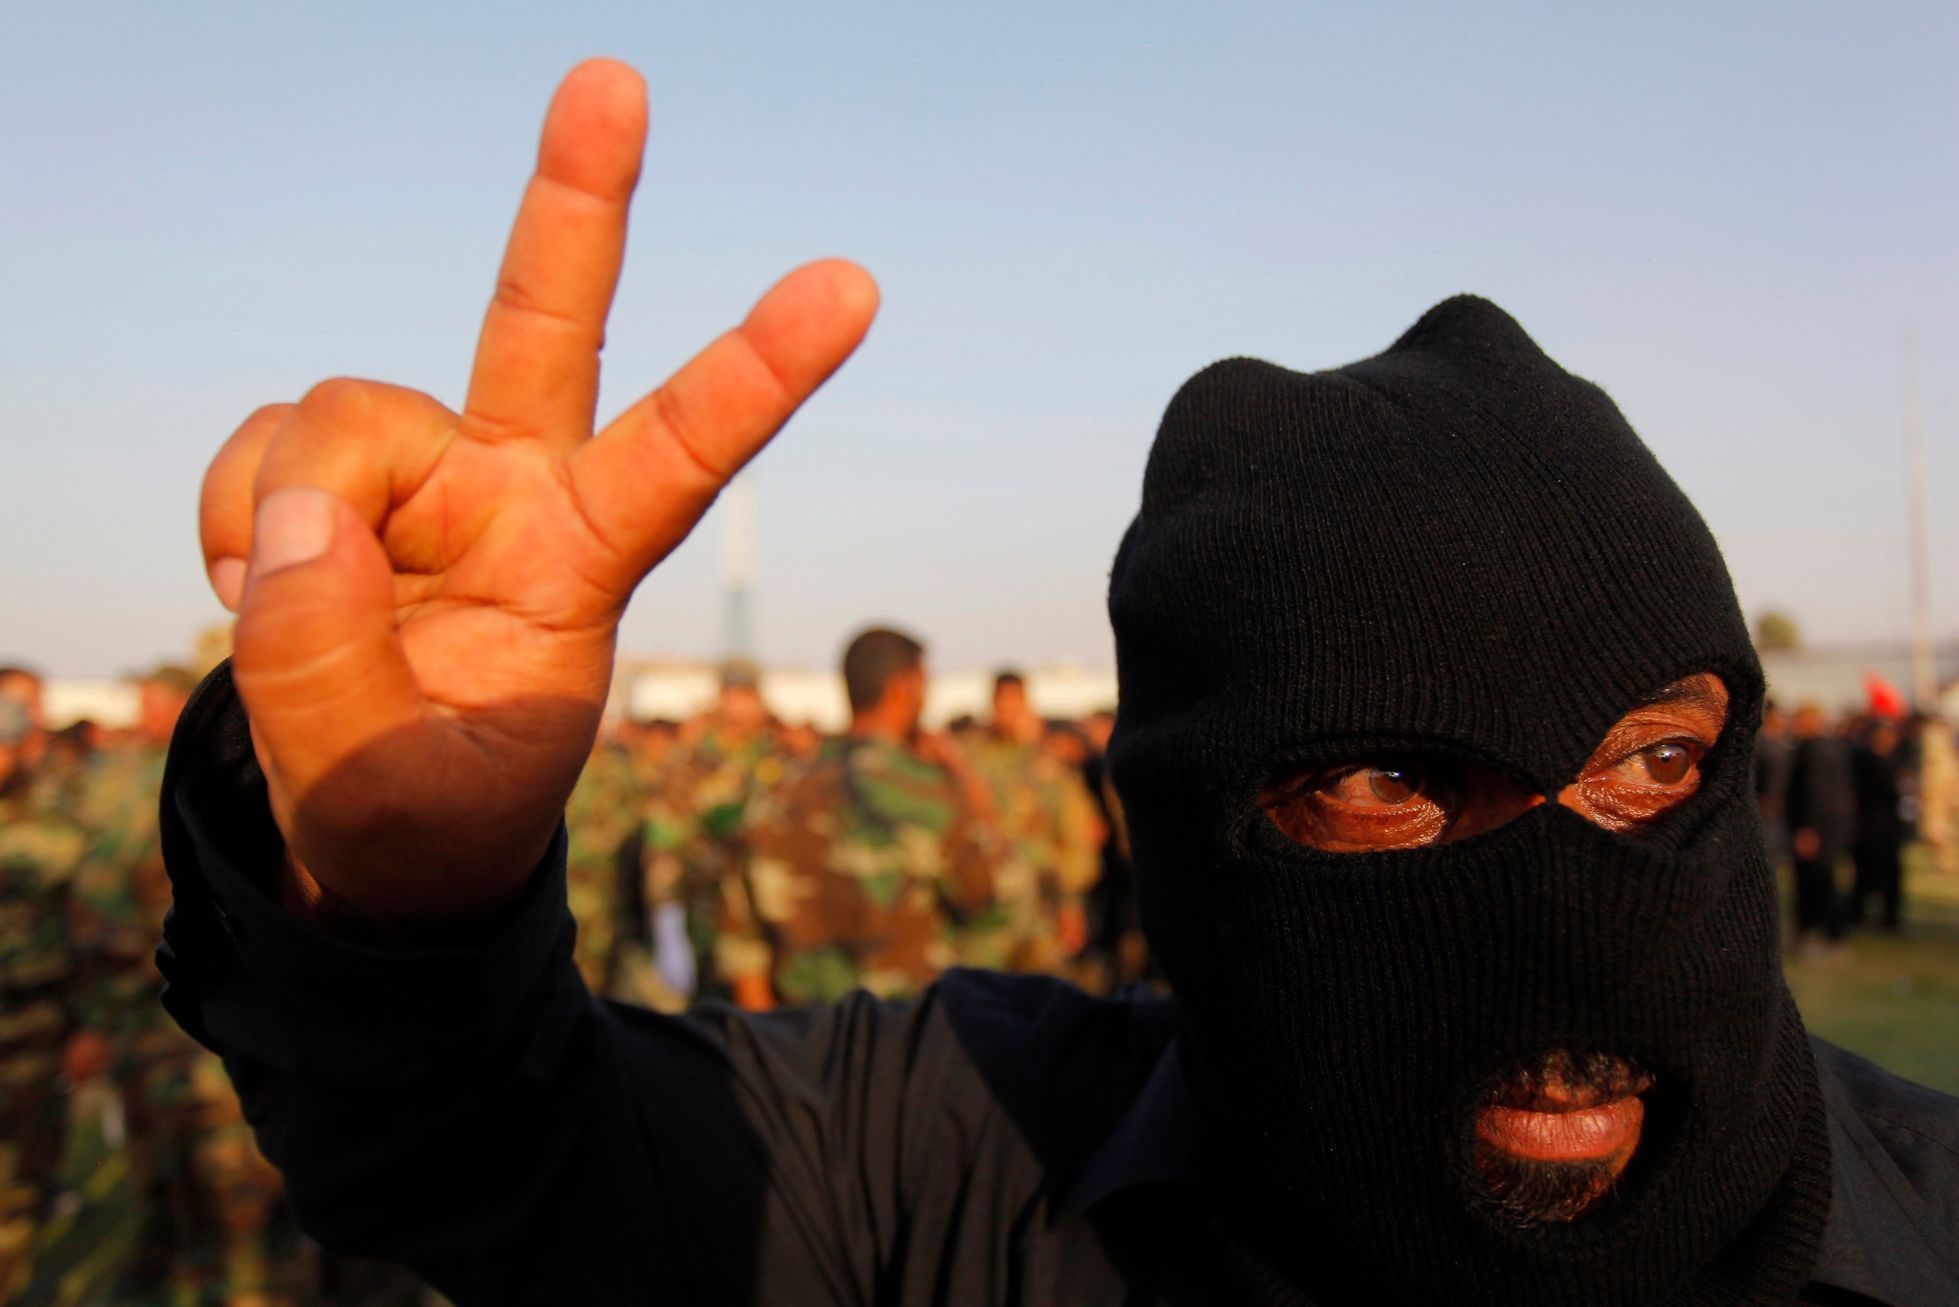 A Mehdi Army fighter loyal to Shi'ite cleric Moqtada al-Sadr gestures during military-style training in Najaf